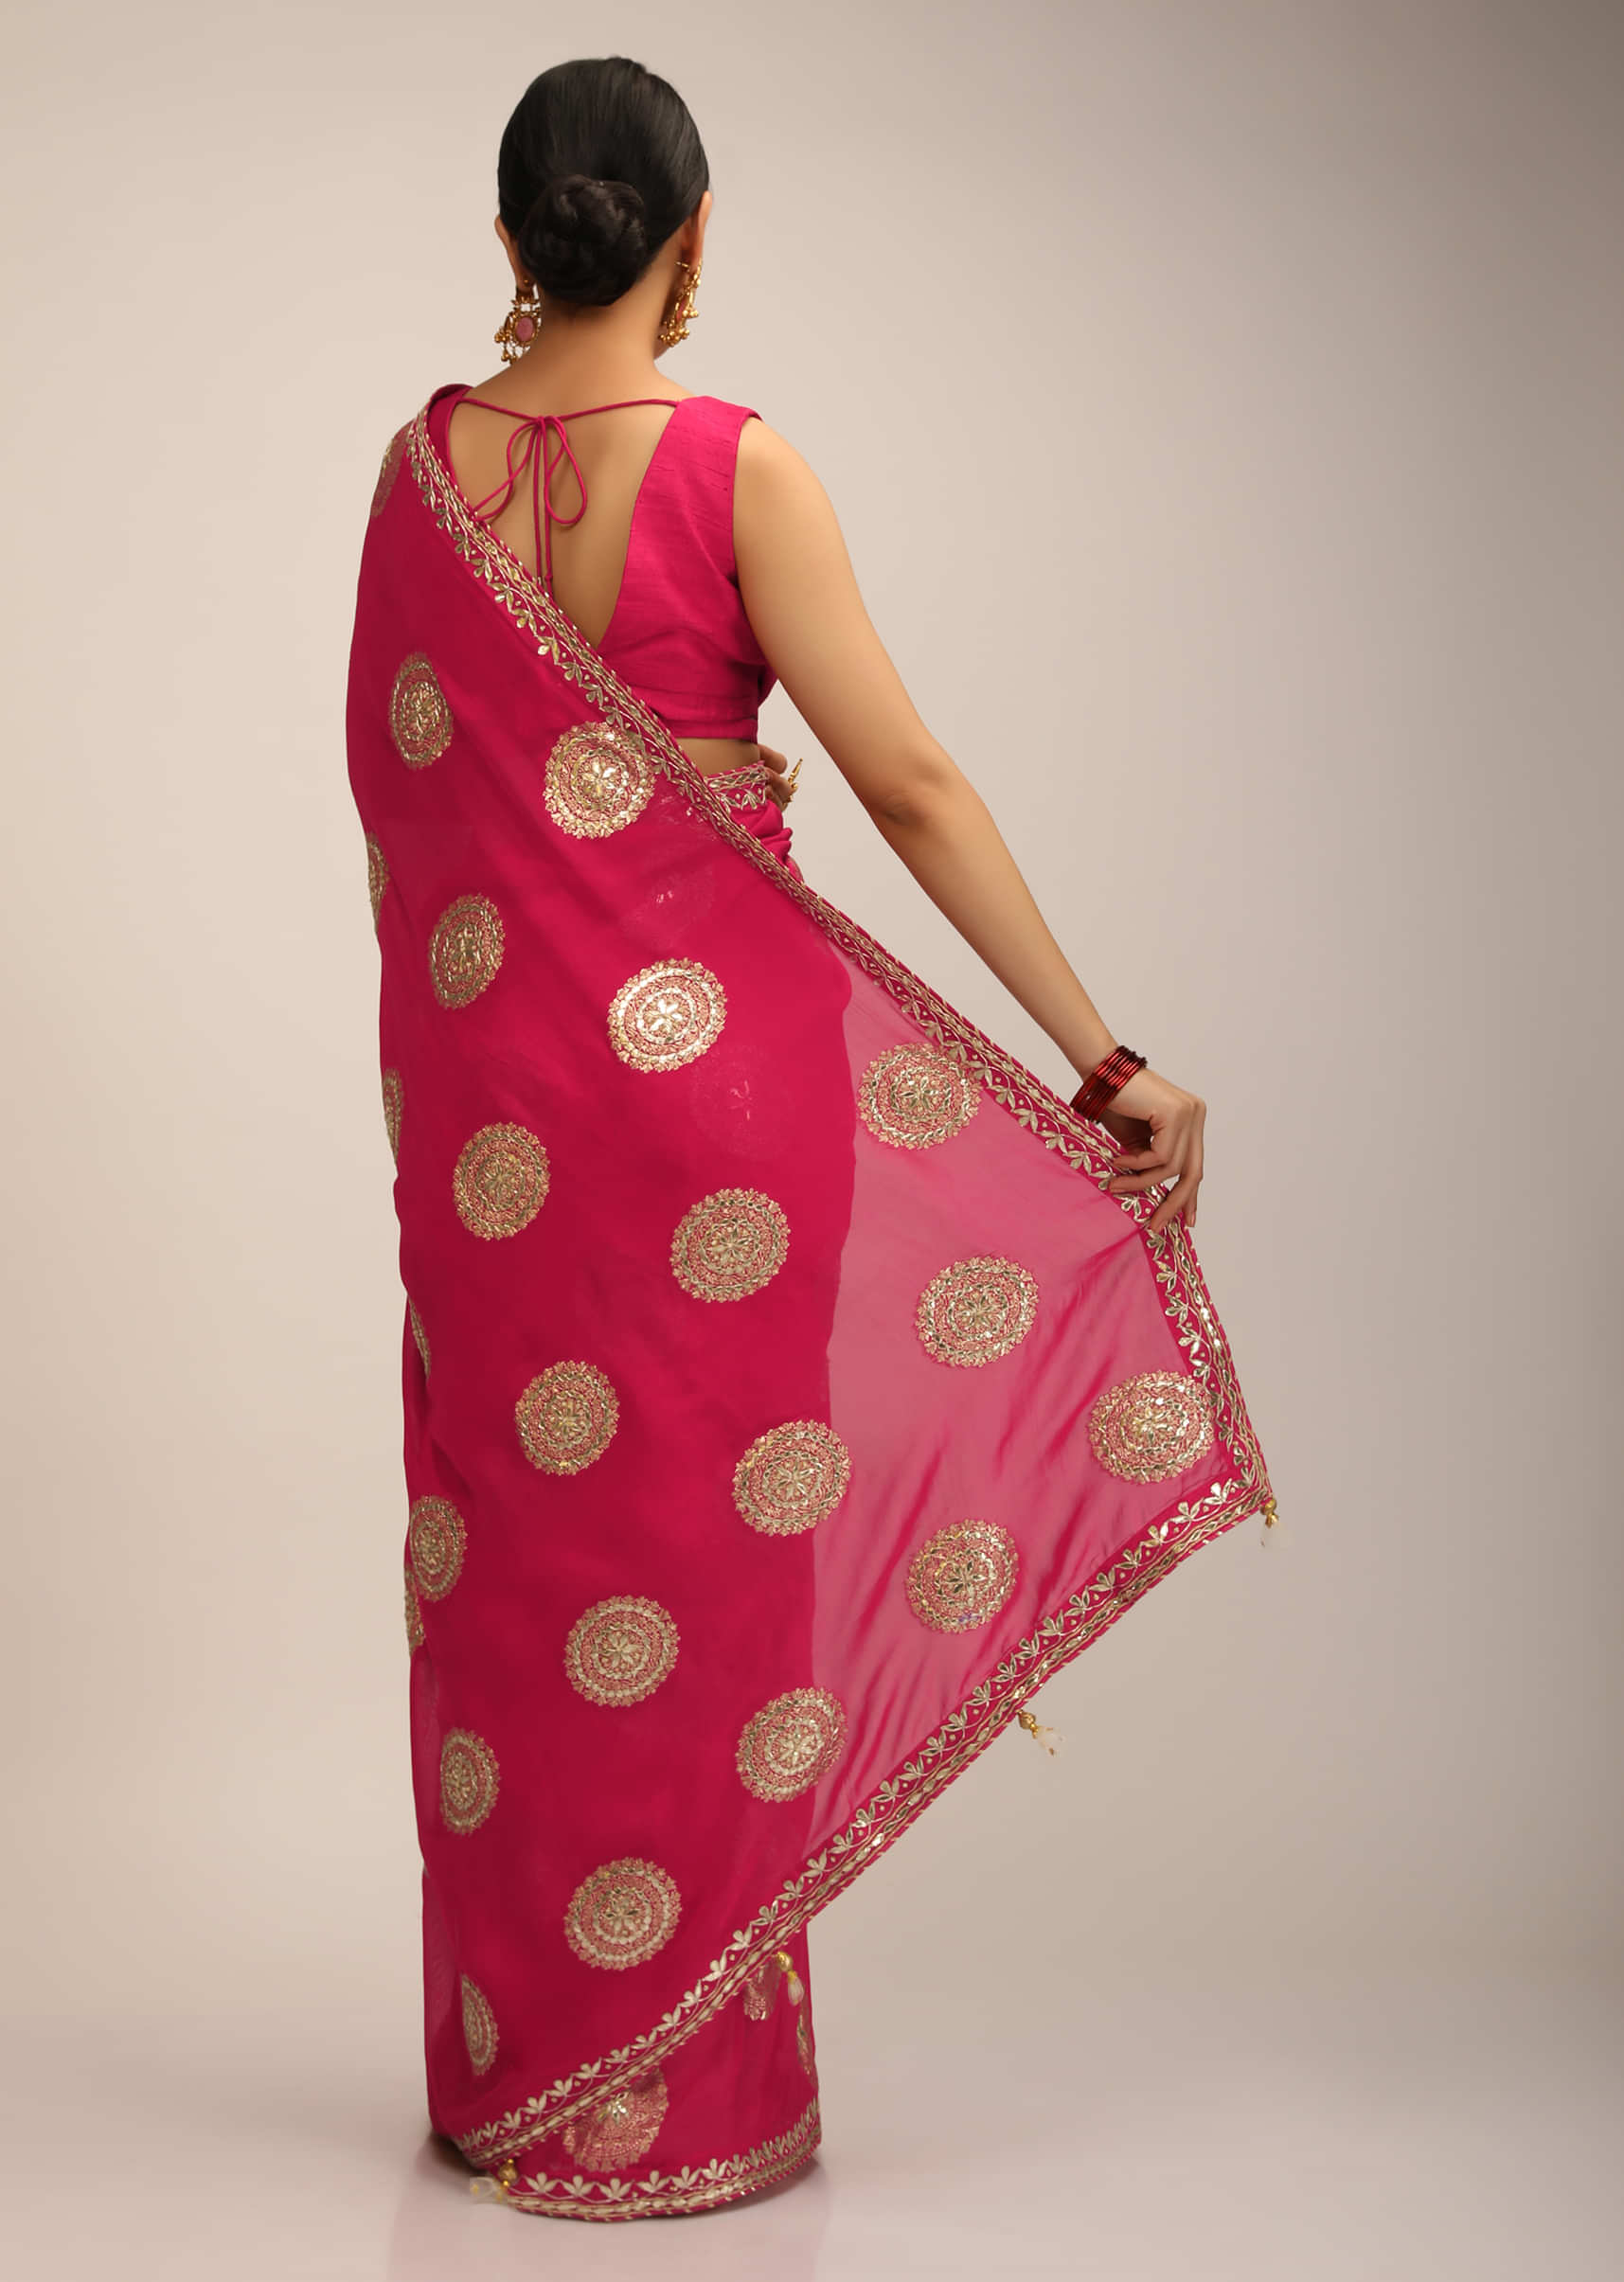 Rani Pink Saree In Organza With Woven Round Buttis And Gotta Embroidery